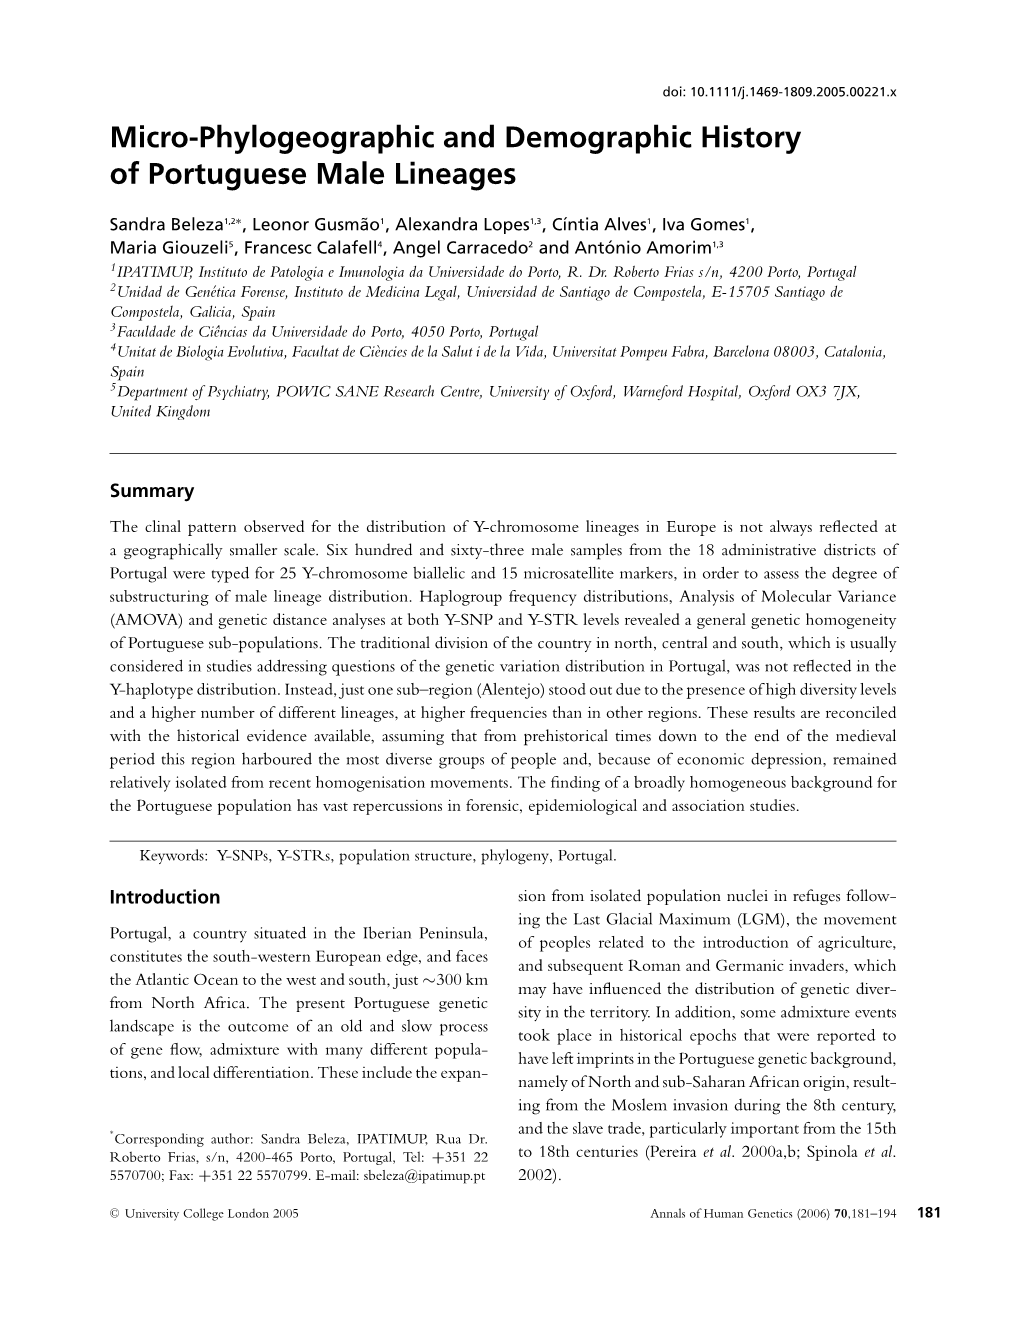 Micro-Phylogeographic and Demographic History of Portuguese Male Lineages